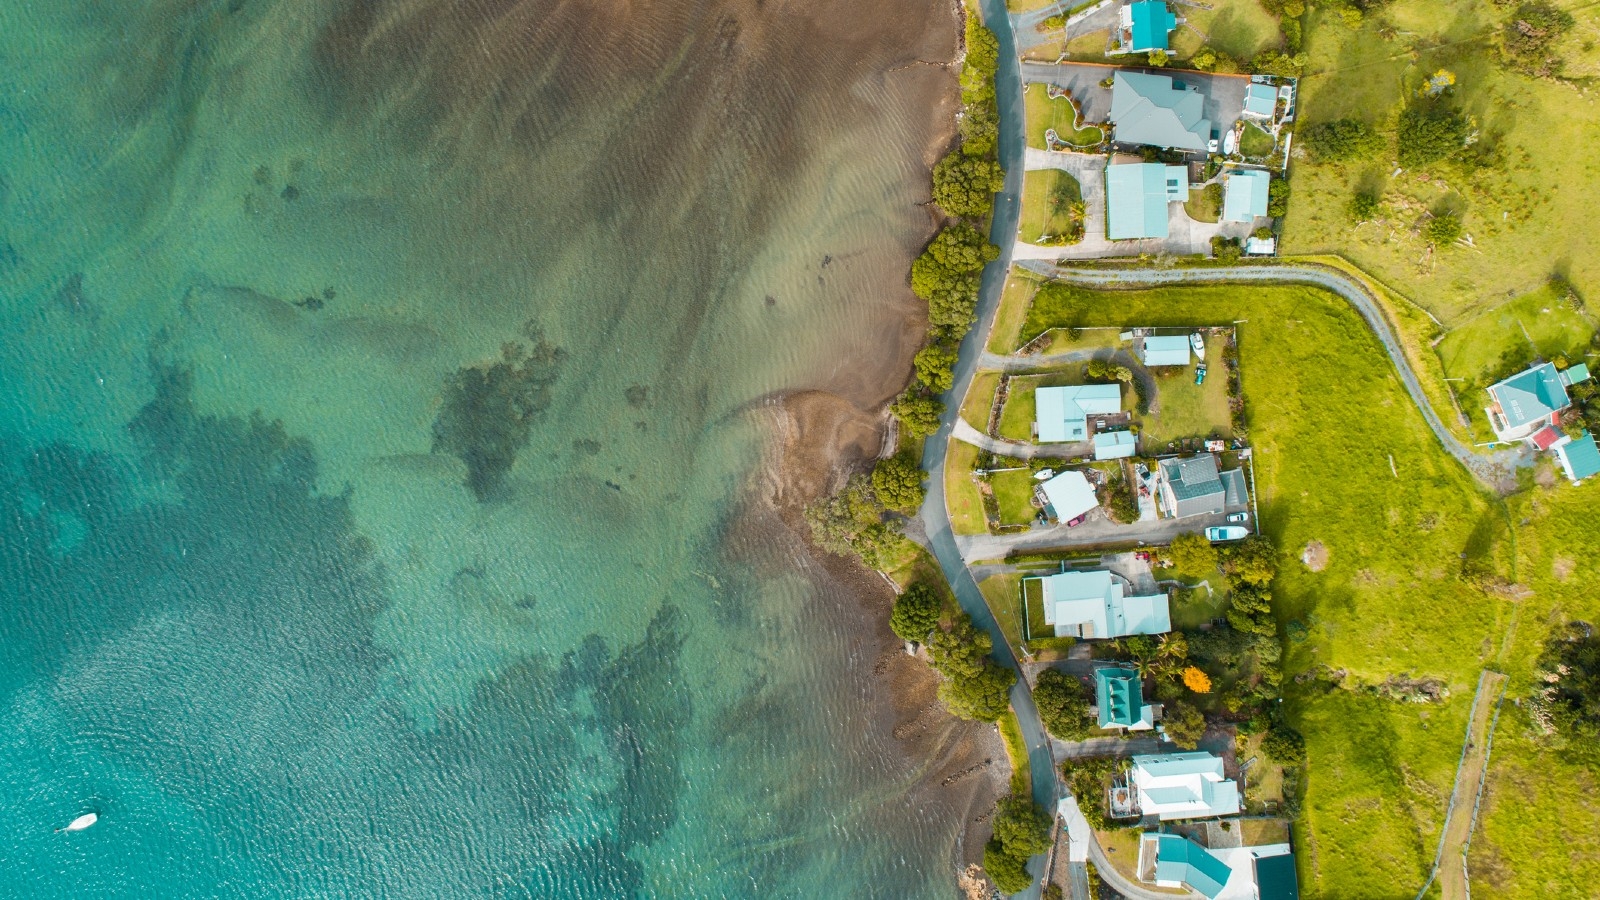 Beachfront homes from up high. What insurance do you need on your house? 